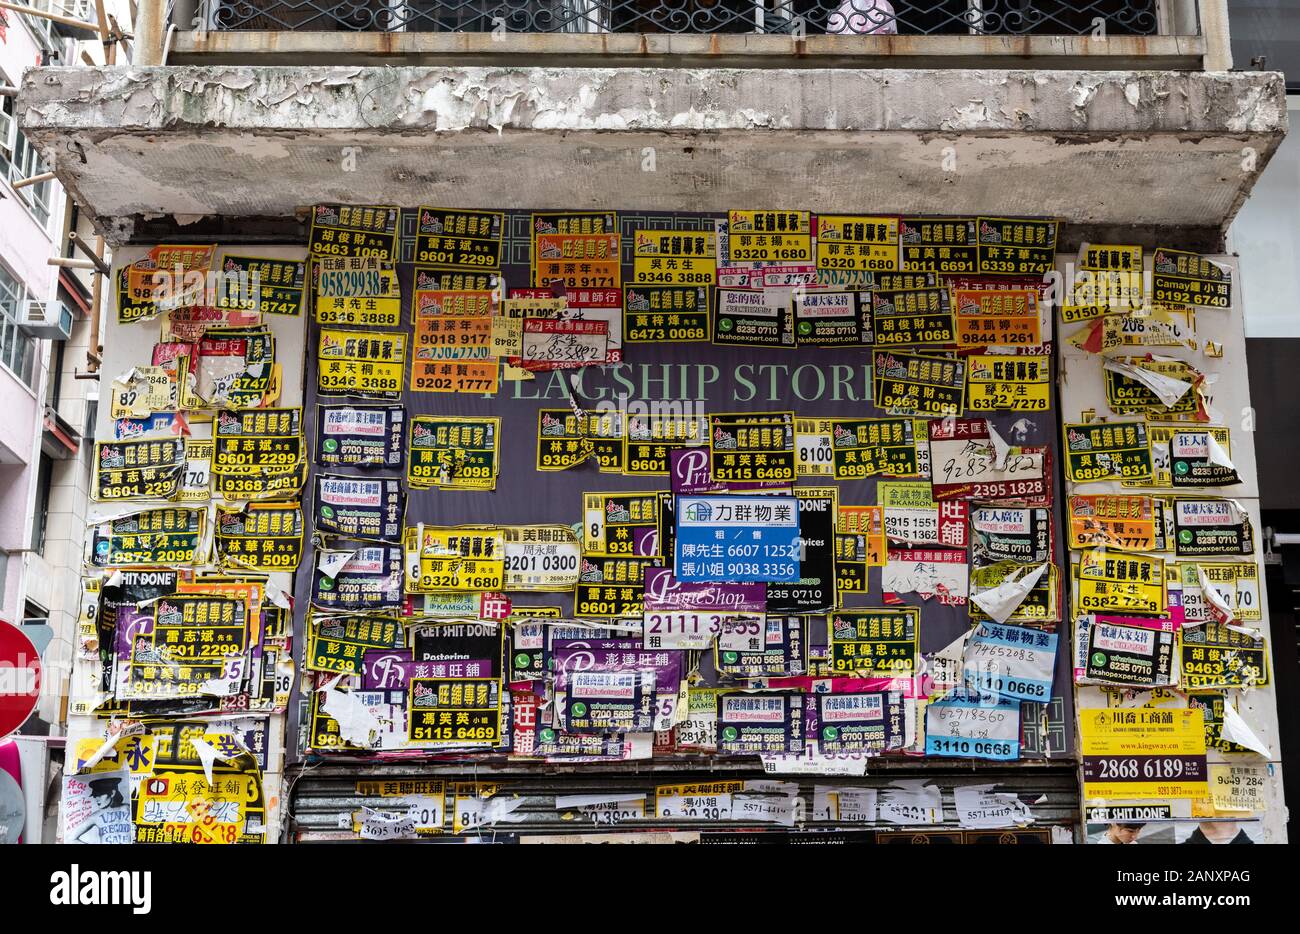 A recently closed handbag shop front is plastered with estate agent advertisements. Businesses in Hong Kong suffer regularly being forced to shut as l Stock Photo